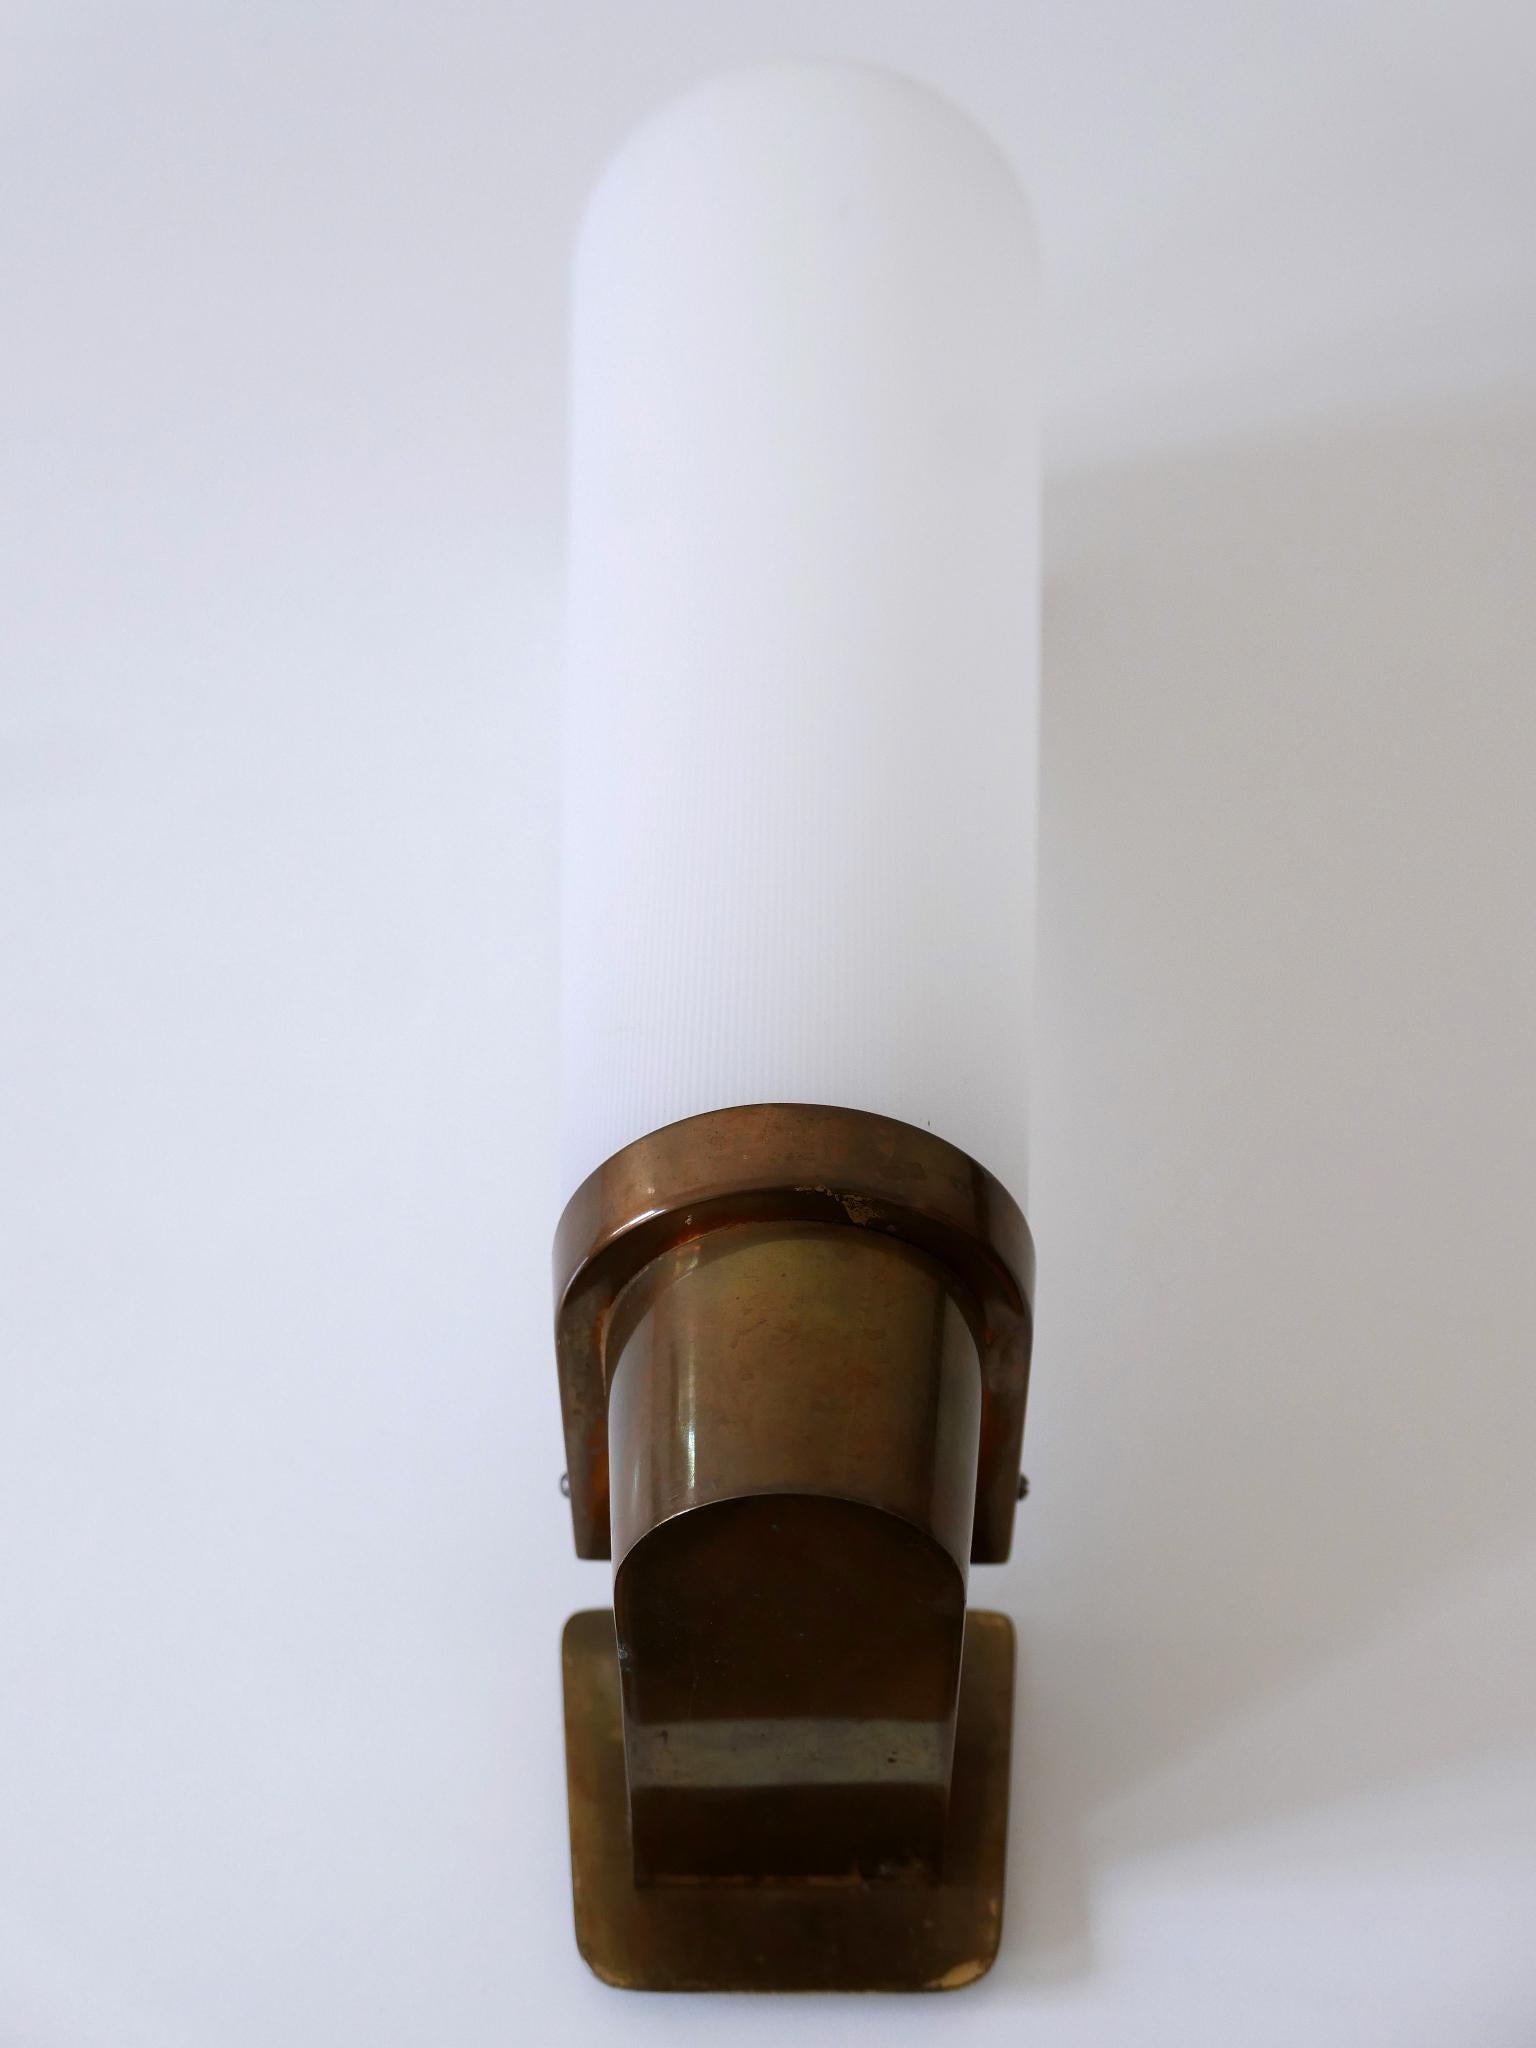 Large Mid-Century Modern Brass & Acrylic Wall Light or Sconce Germany 1950s For Sale 5